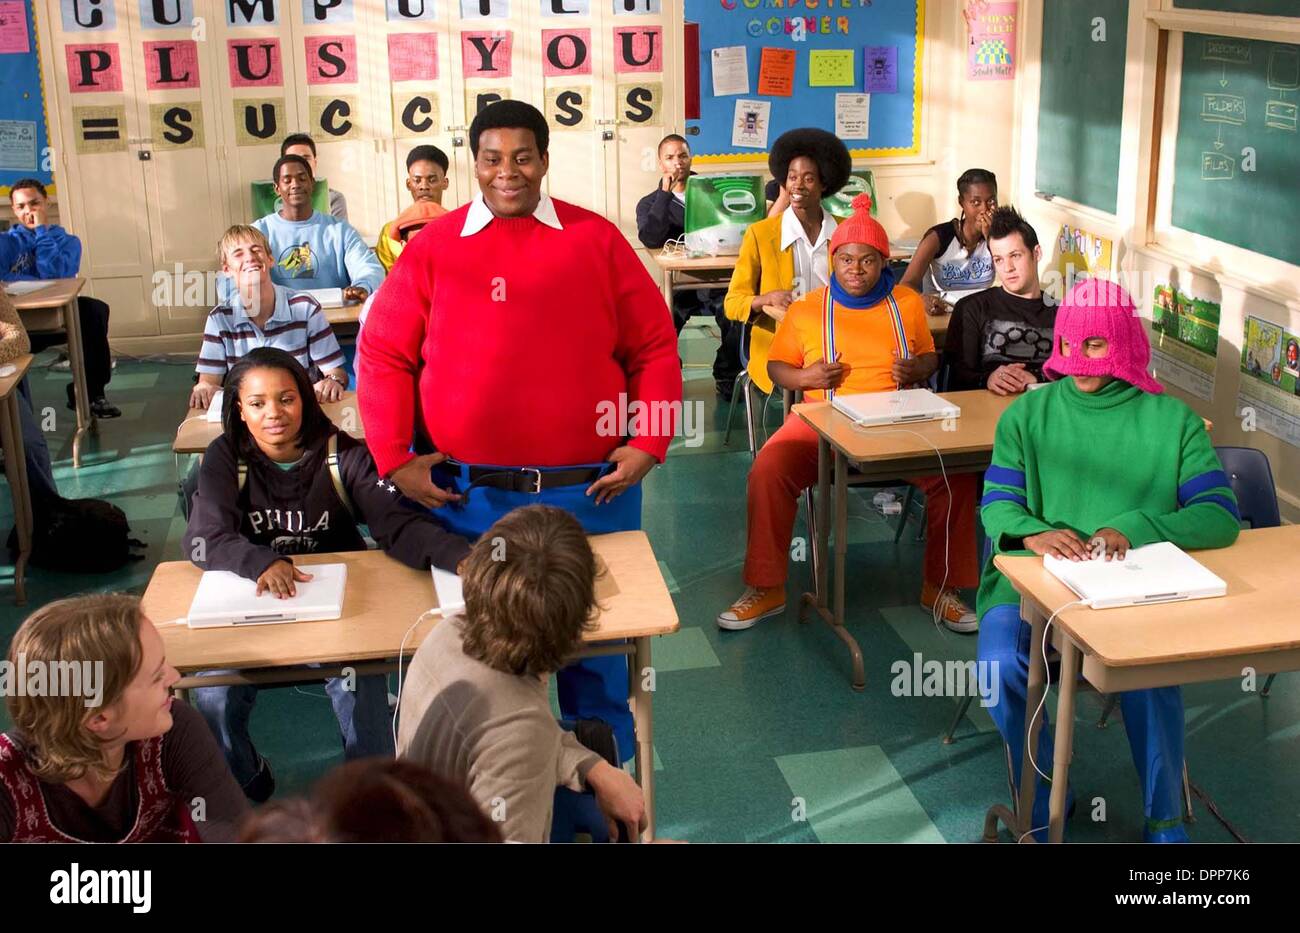 Feb. 8, 2006 - Doris (Kyla Pratt, seated left) brings her new friends, Fat Albert (Kenan Thompson) and the Cosby Kids to class with her.  Fat AlbertÃ•s pals are (back row, L-R) Bill (Keith D. Robinson), Bucky (Alphonso McAuley) and Old Weird Harold (Aaron A. Frazier).  In the middle row are schoolmates played by Aaron Carter (L) and Joel Madden (R) seated beside Mushmouth (Jermaine Stock Photo